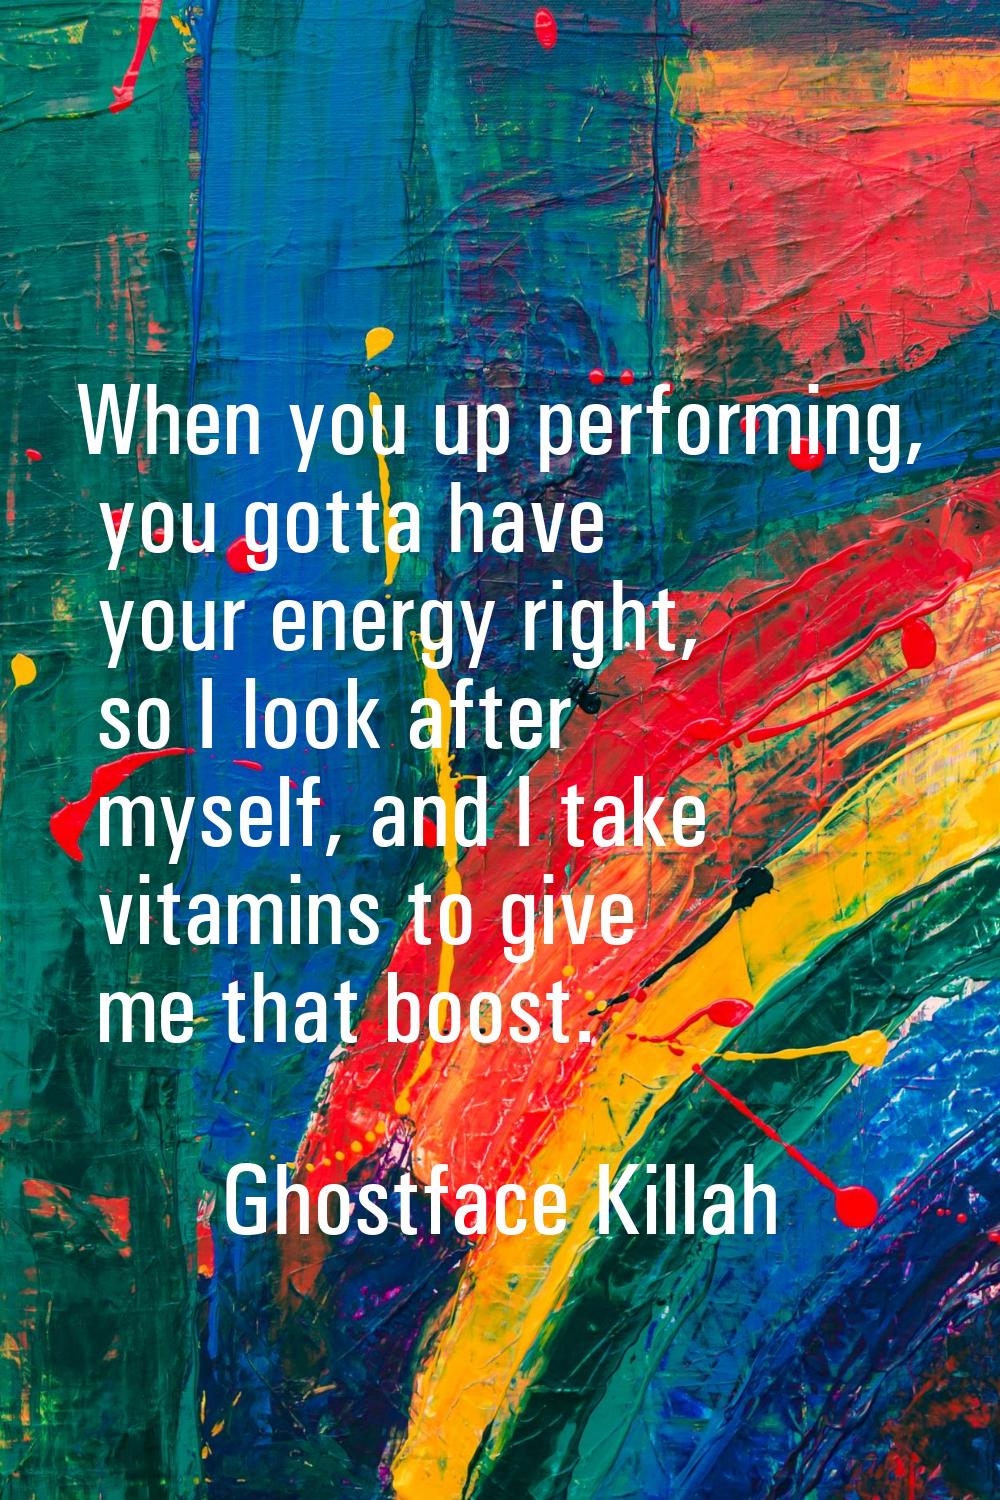 When you up performing, you gotta have your energy right, so I look after myself, and I take vitami